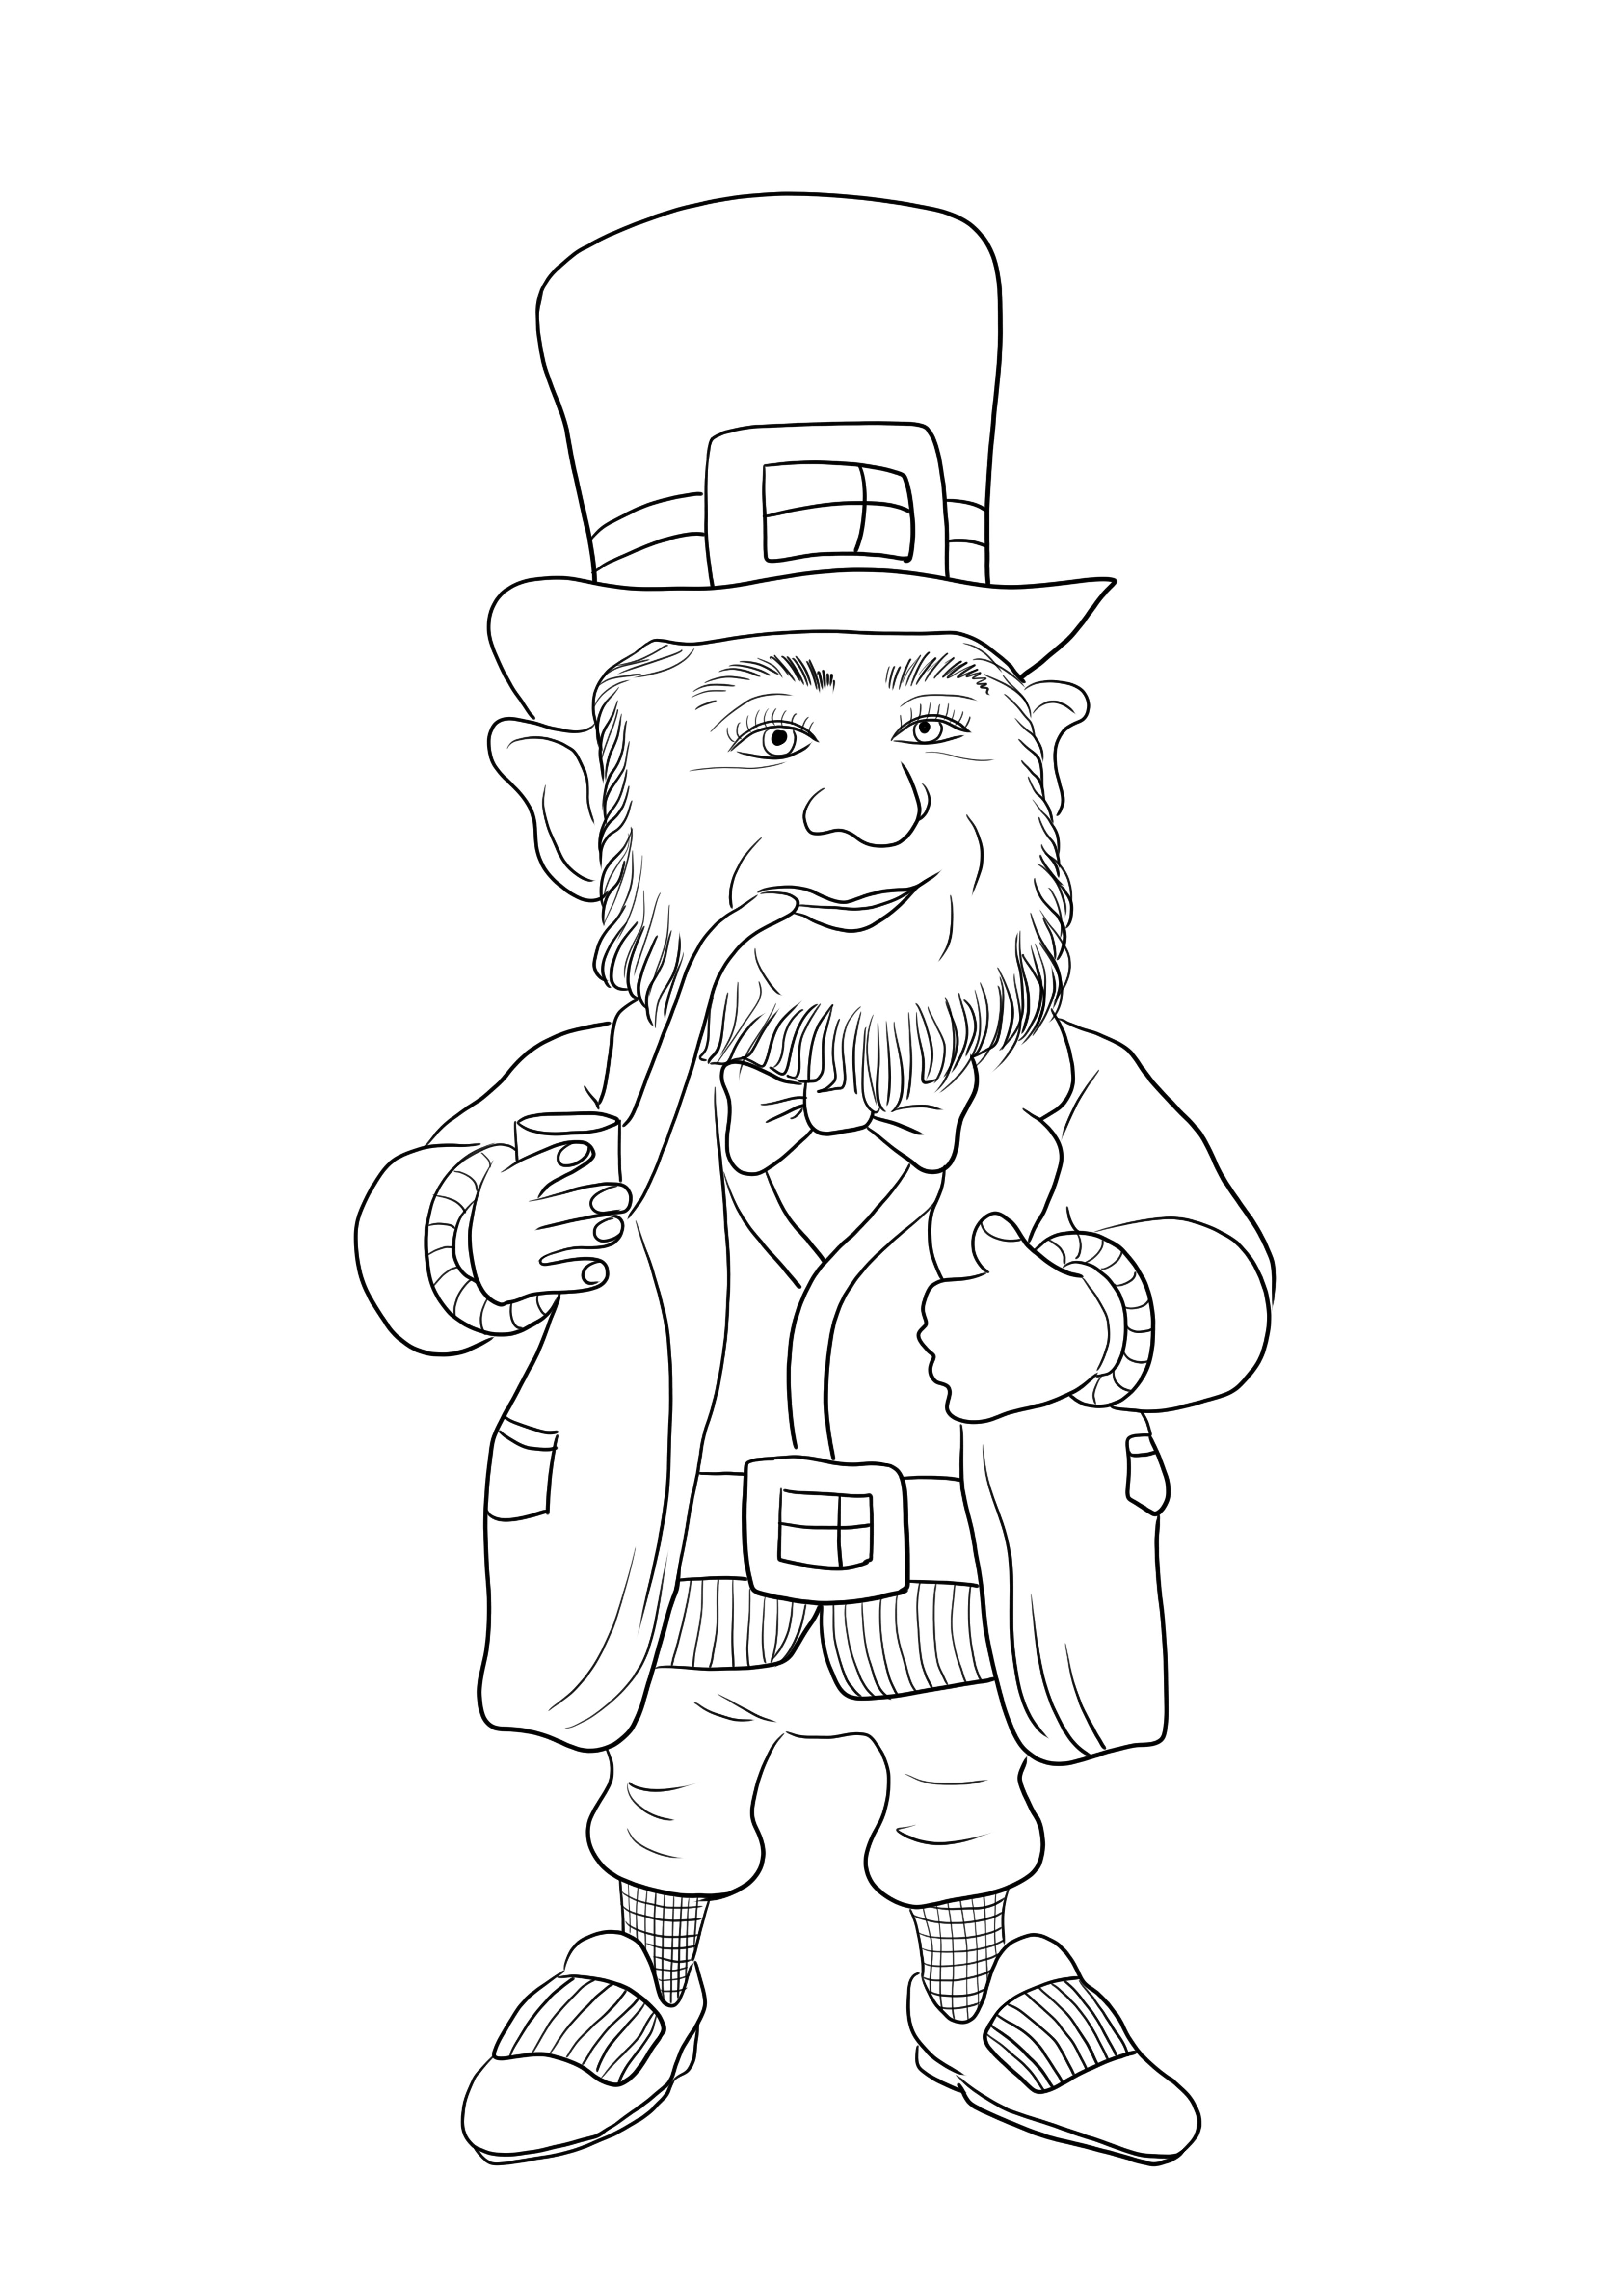 Leprechaun coloring and printing for free